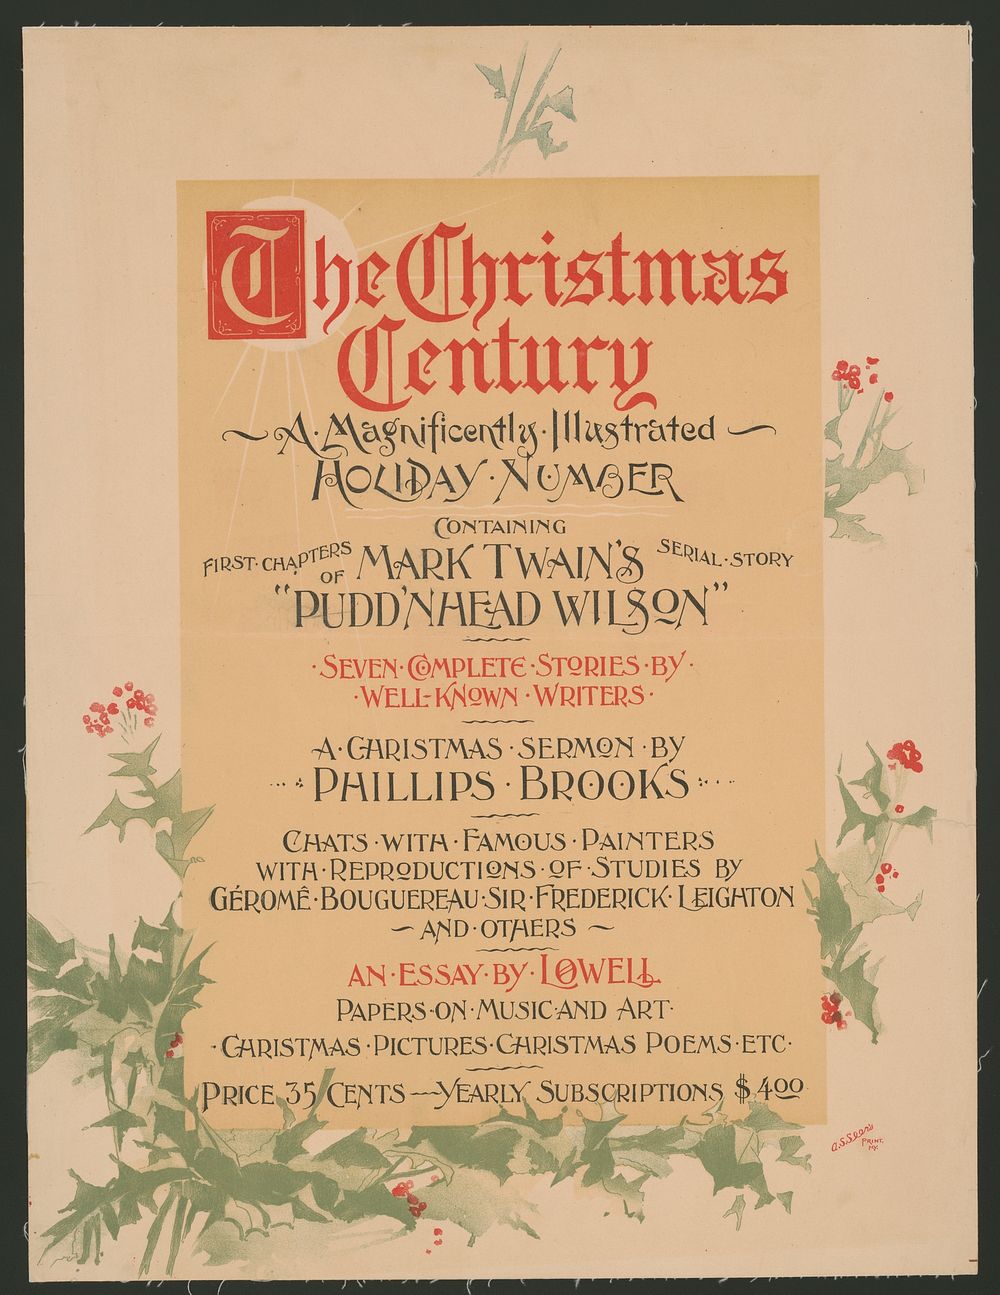 The Christmas Century, a magnificently illustrated holiday number...